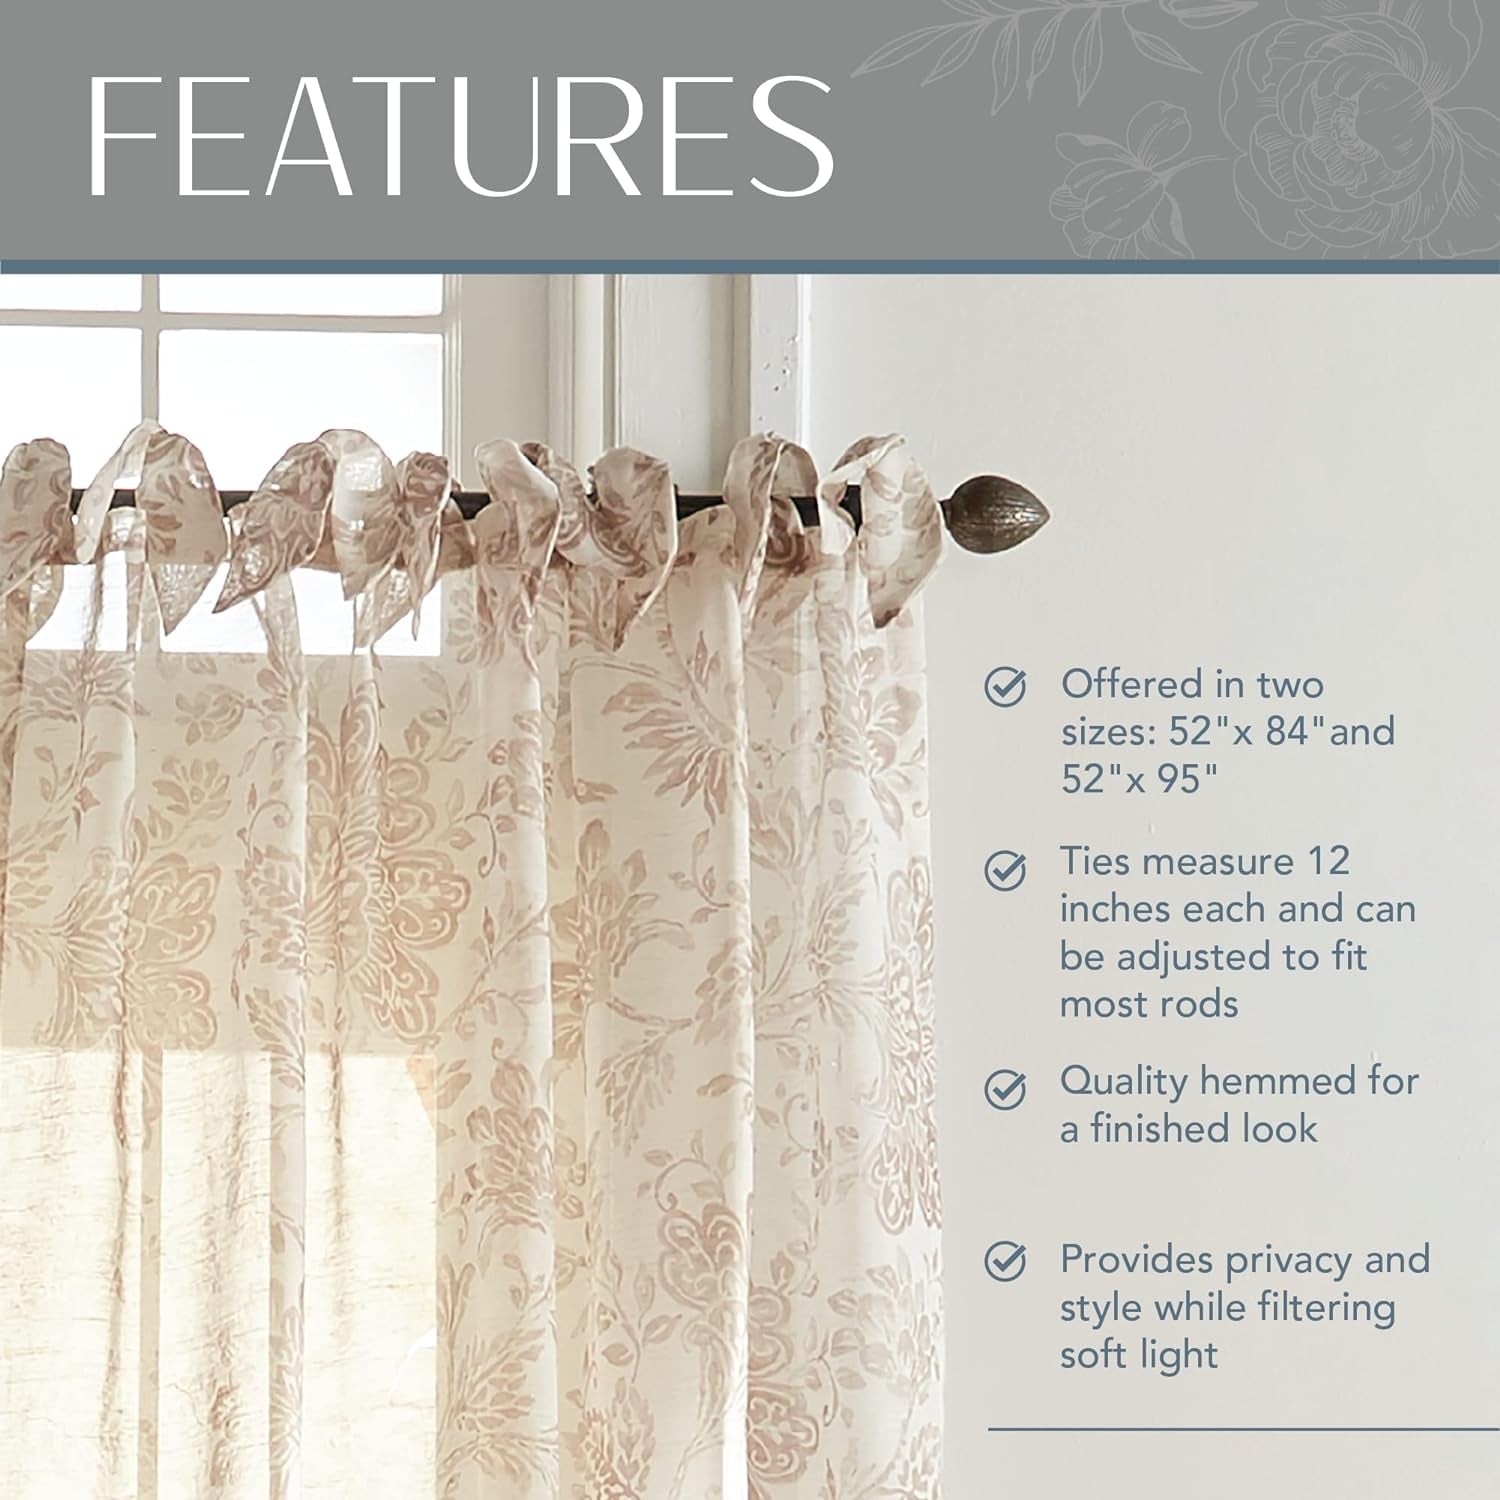 Elrene Home Fashions Fashions Westport Floral Tie-Top Sheer Window Curtain, 95.00" X 52.00", Flax  Elrene Home Fashions   